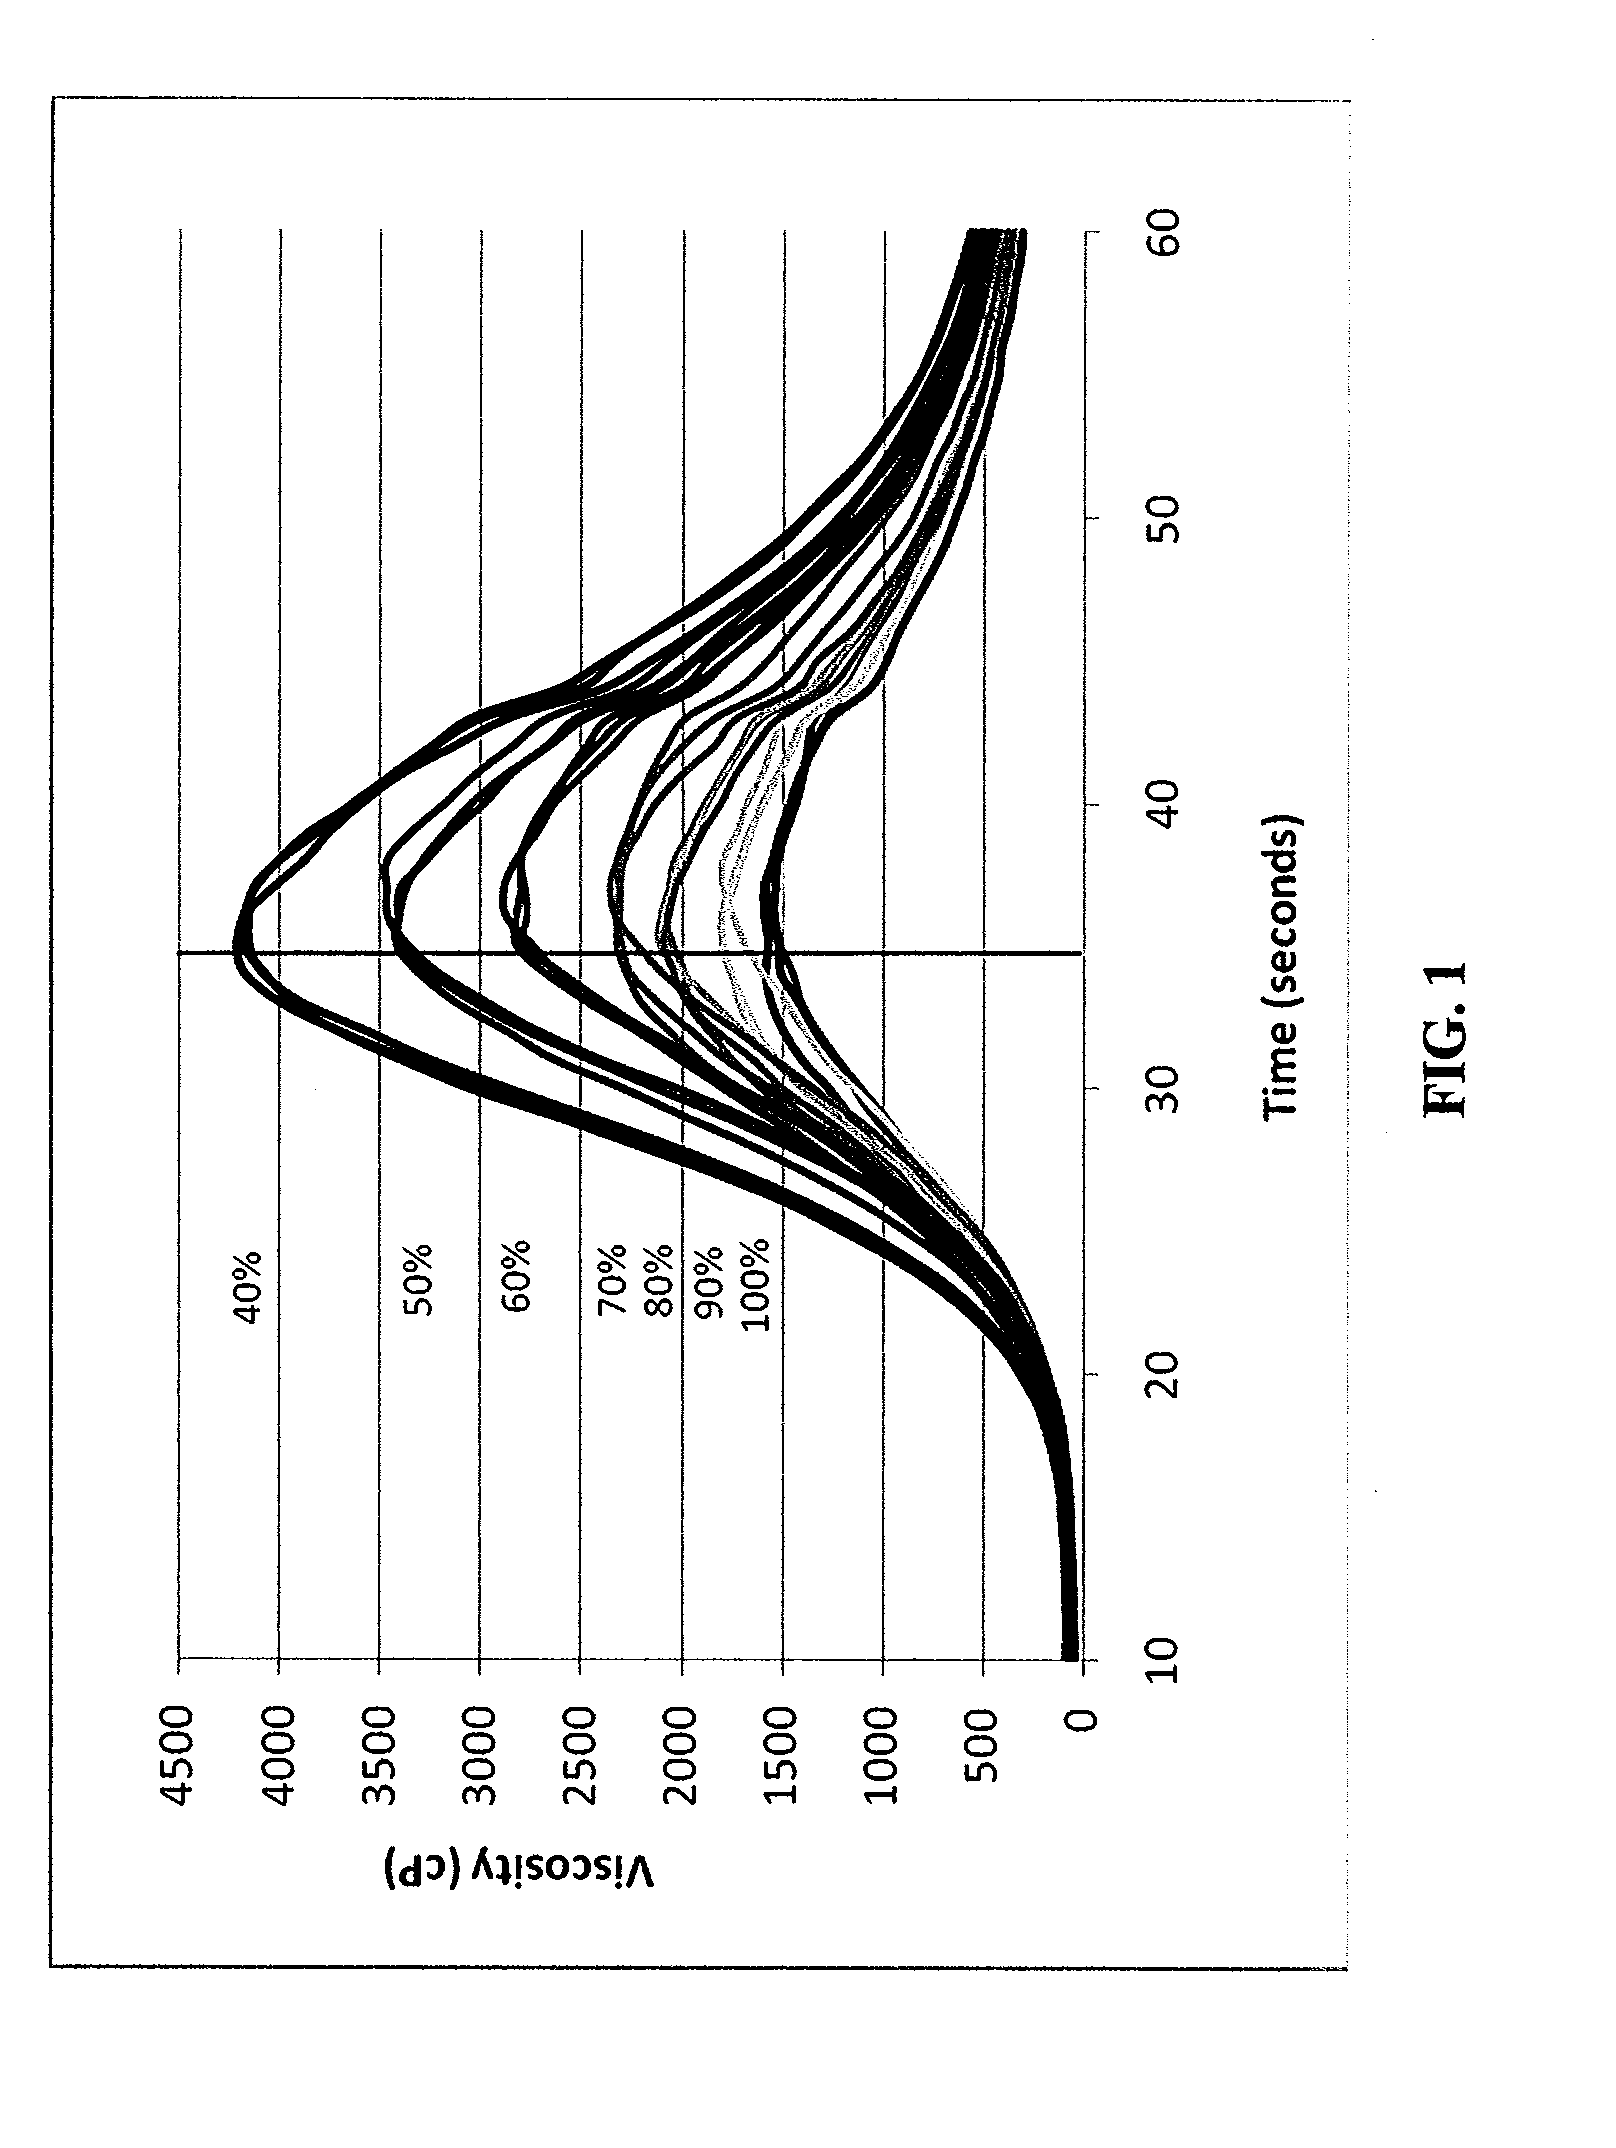 Methods for detecting and measuring polysaccharide-hydrolyzing enzymes